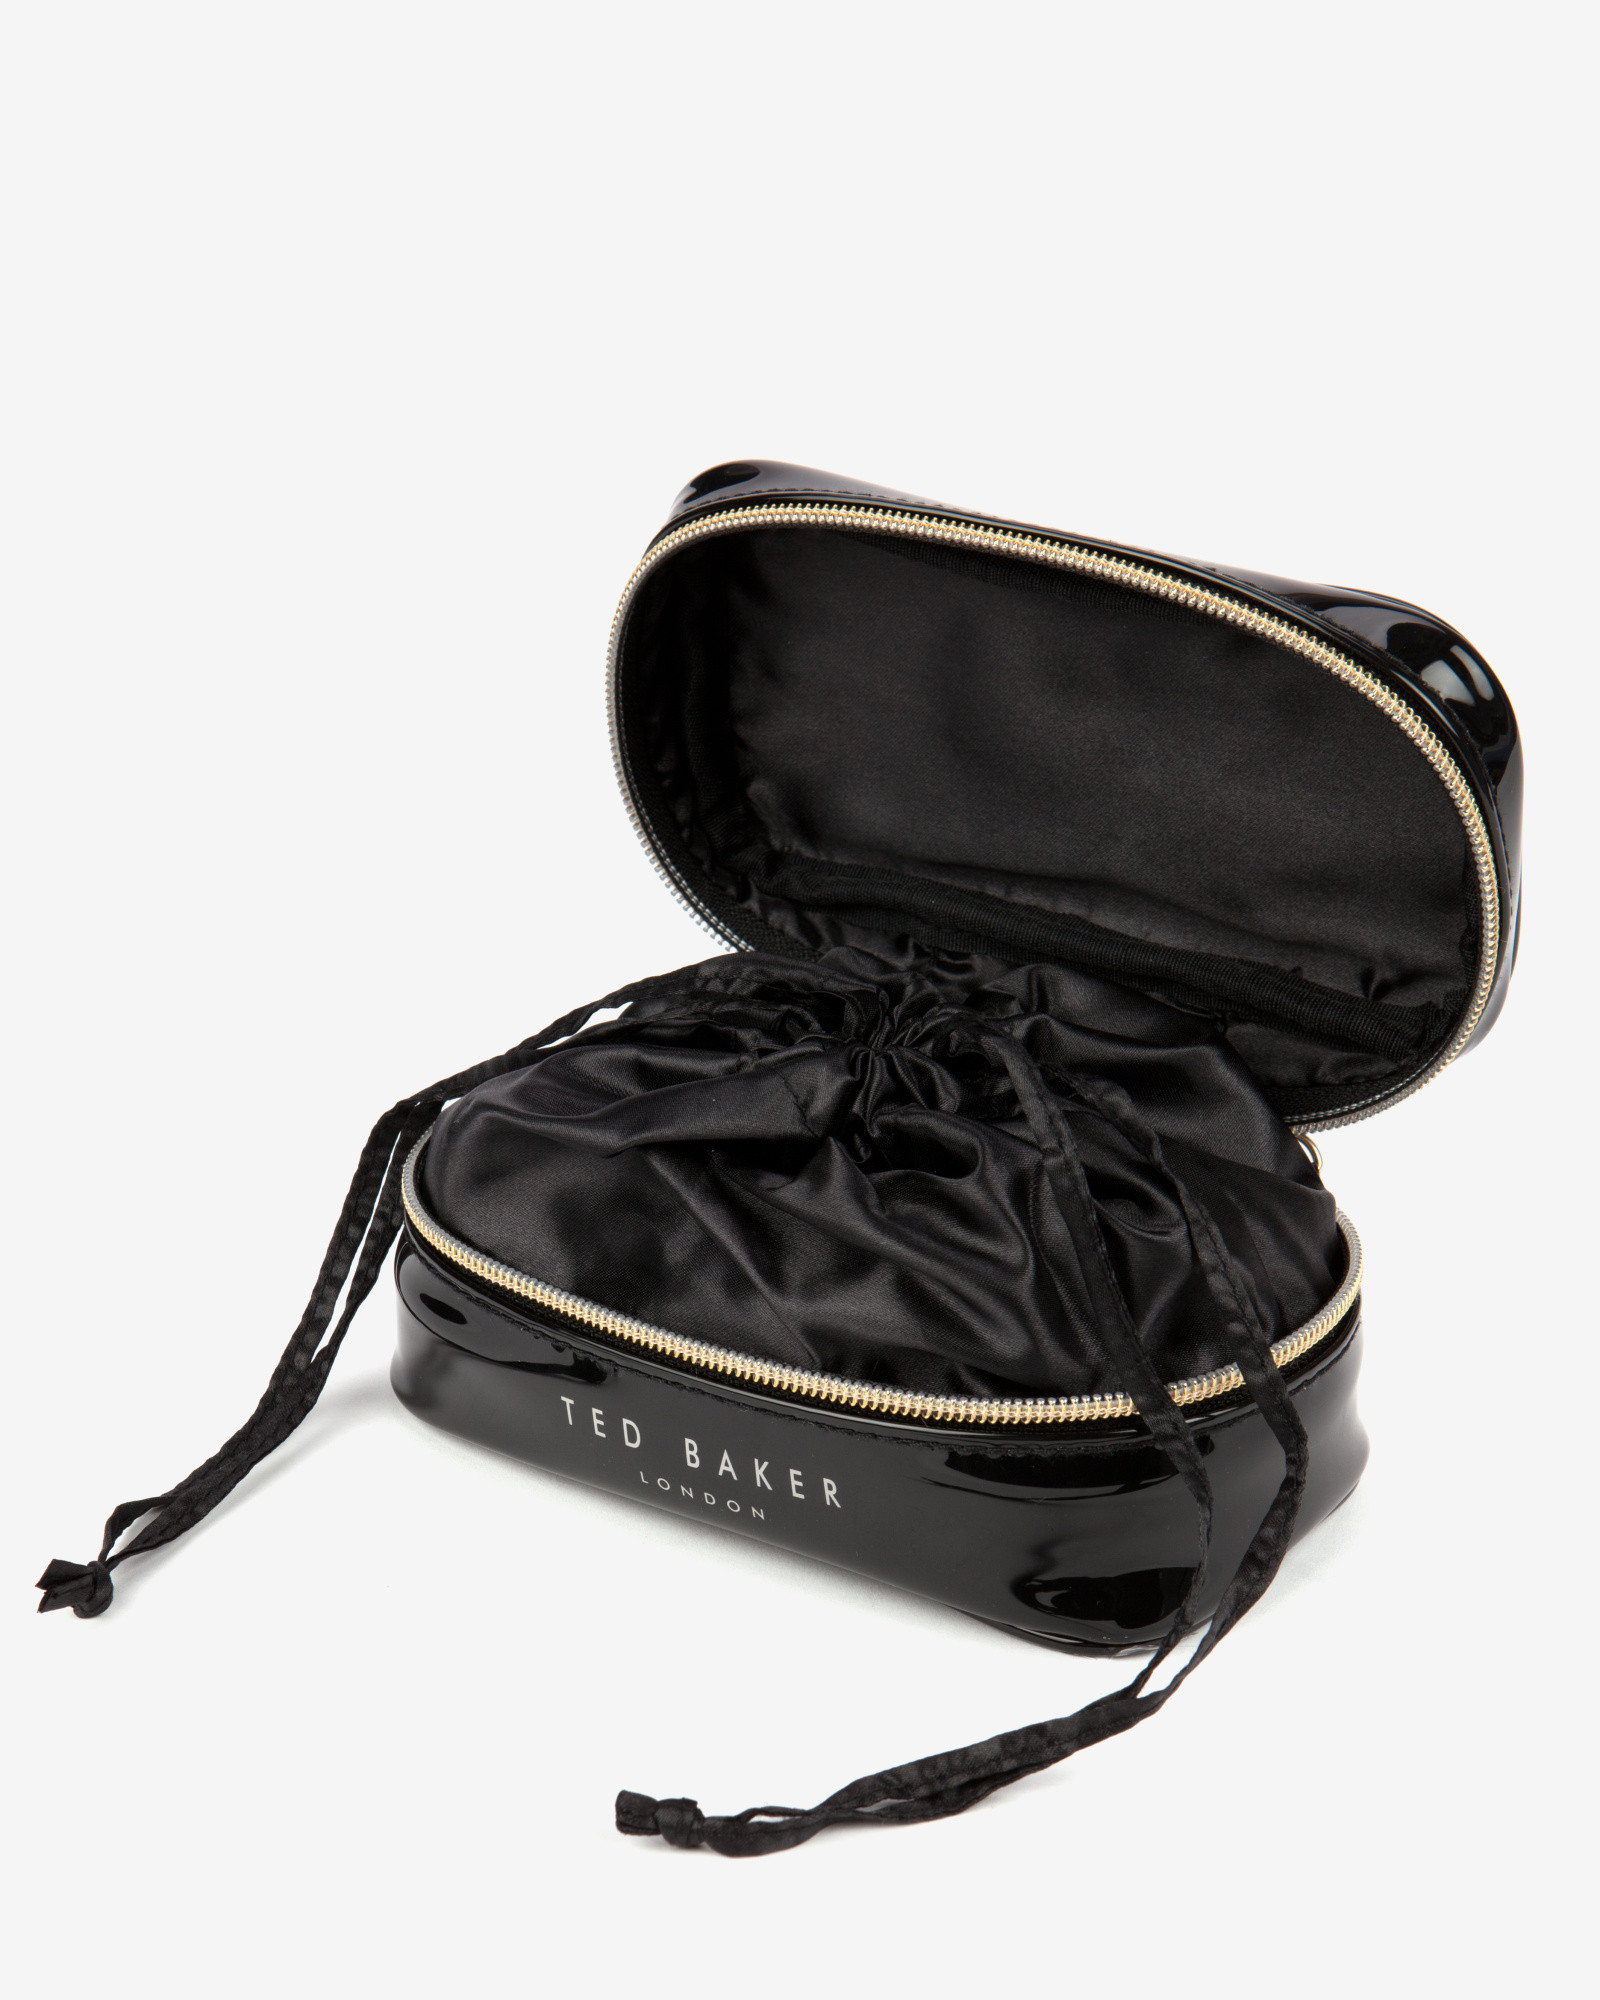 Ted baker Slim Bow Jewelry Case in Black | Lyst